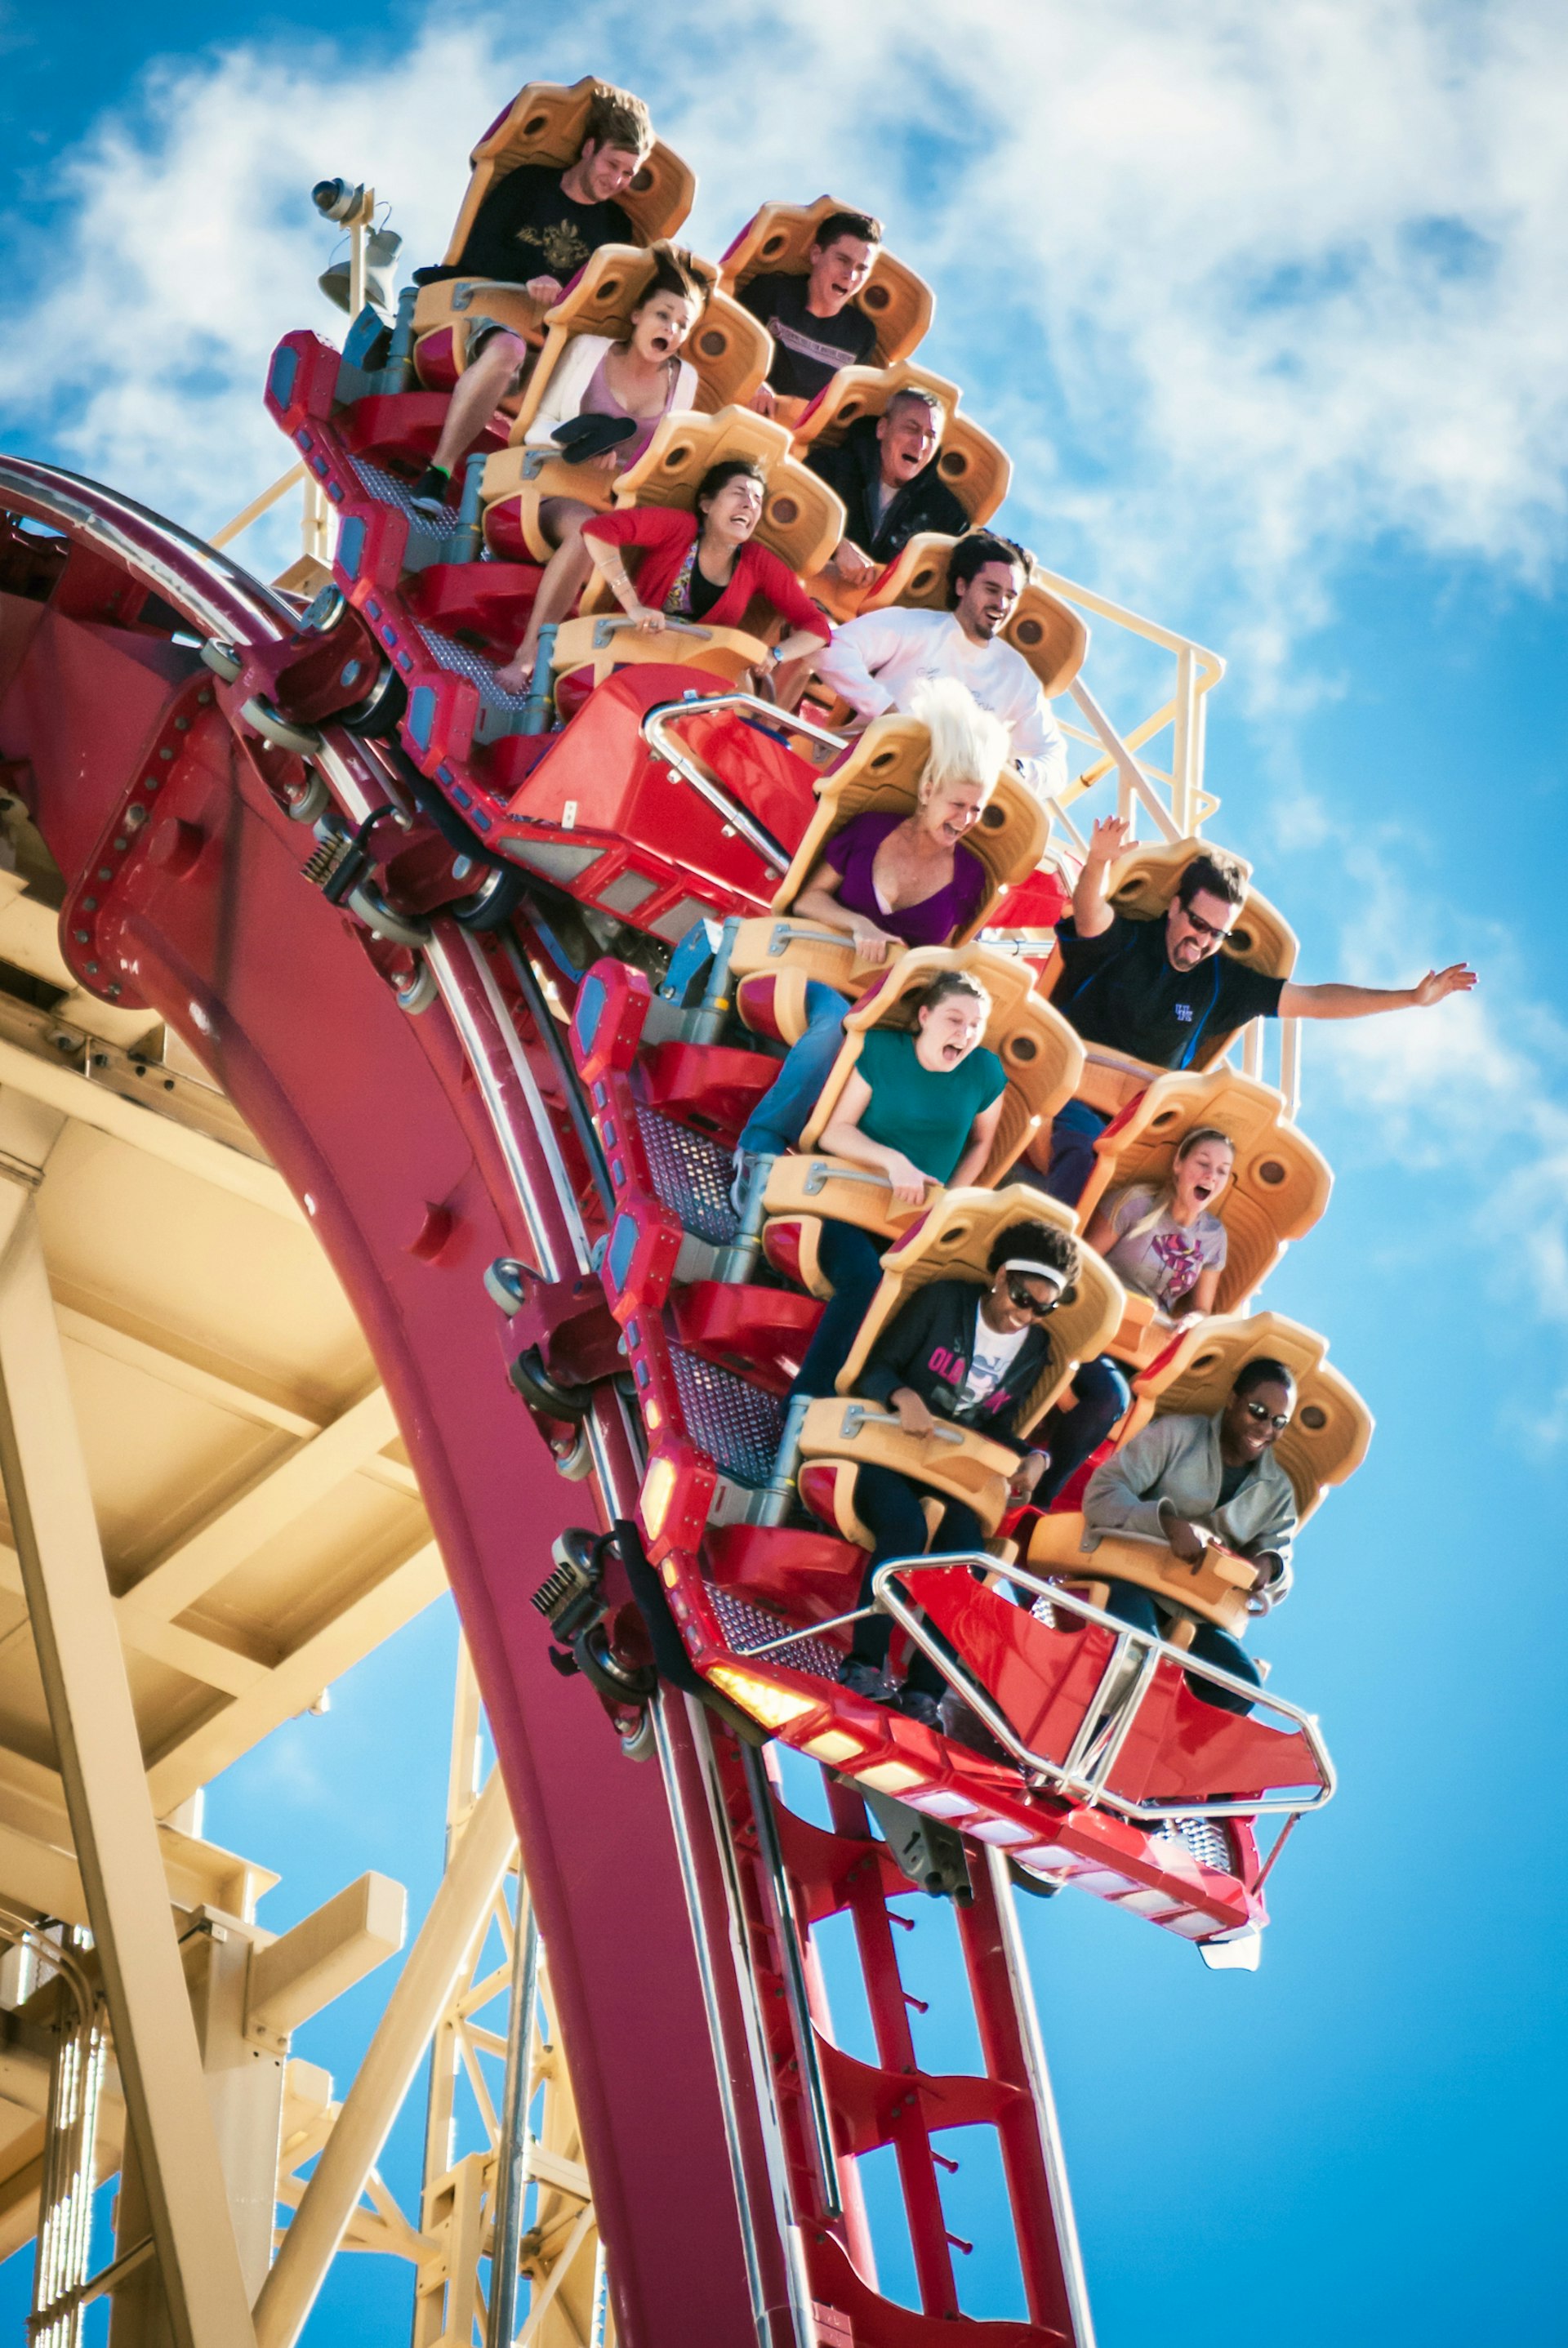 A rollercoaster dropping down from its peak. Passengers have expressions showing a mix of fear, excitement and fun